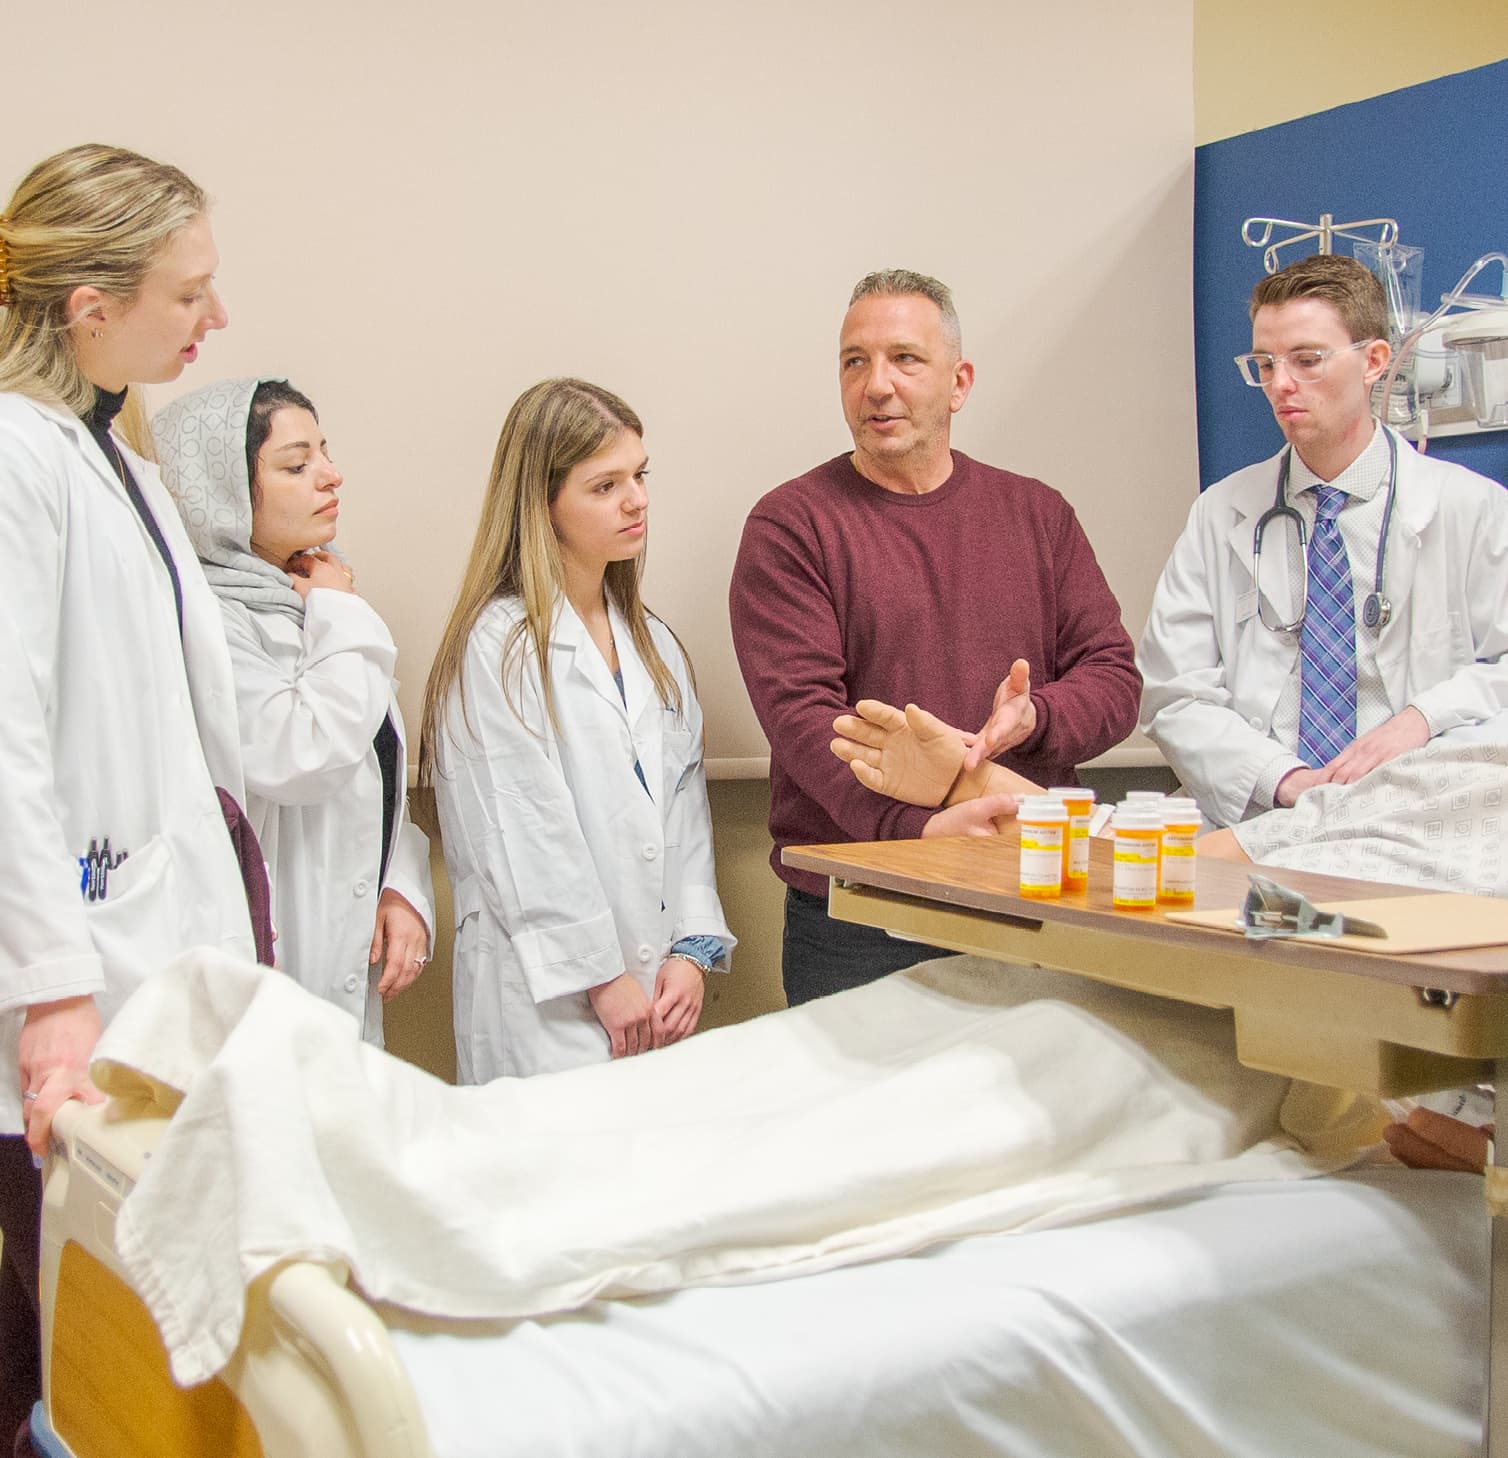 Students with professor in hospital setting